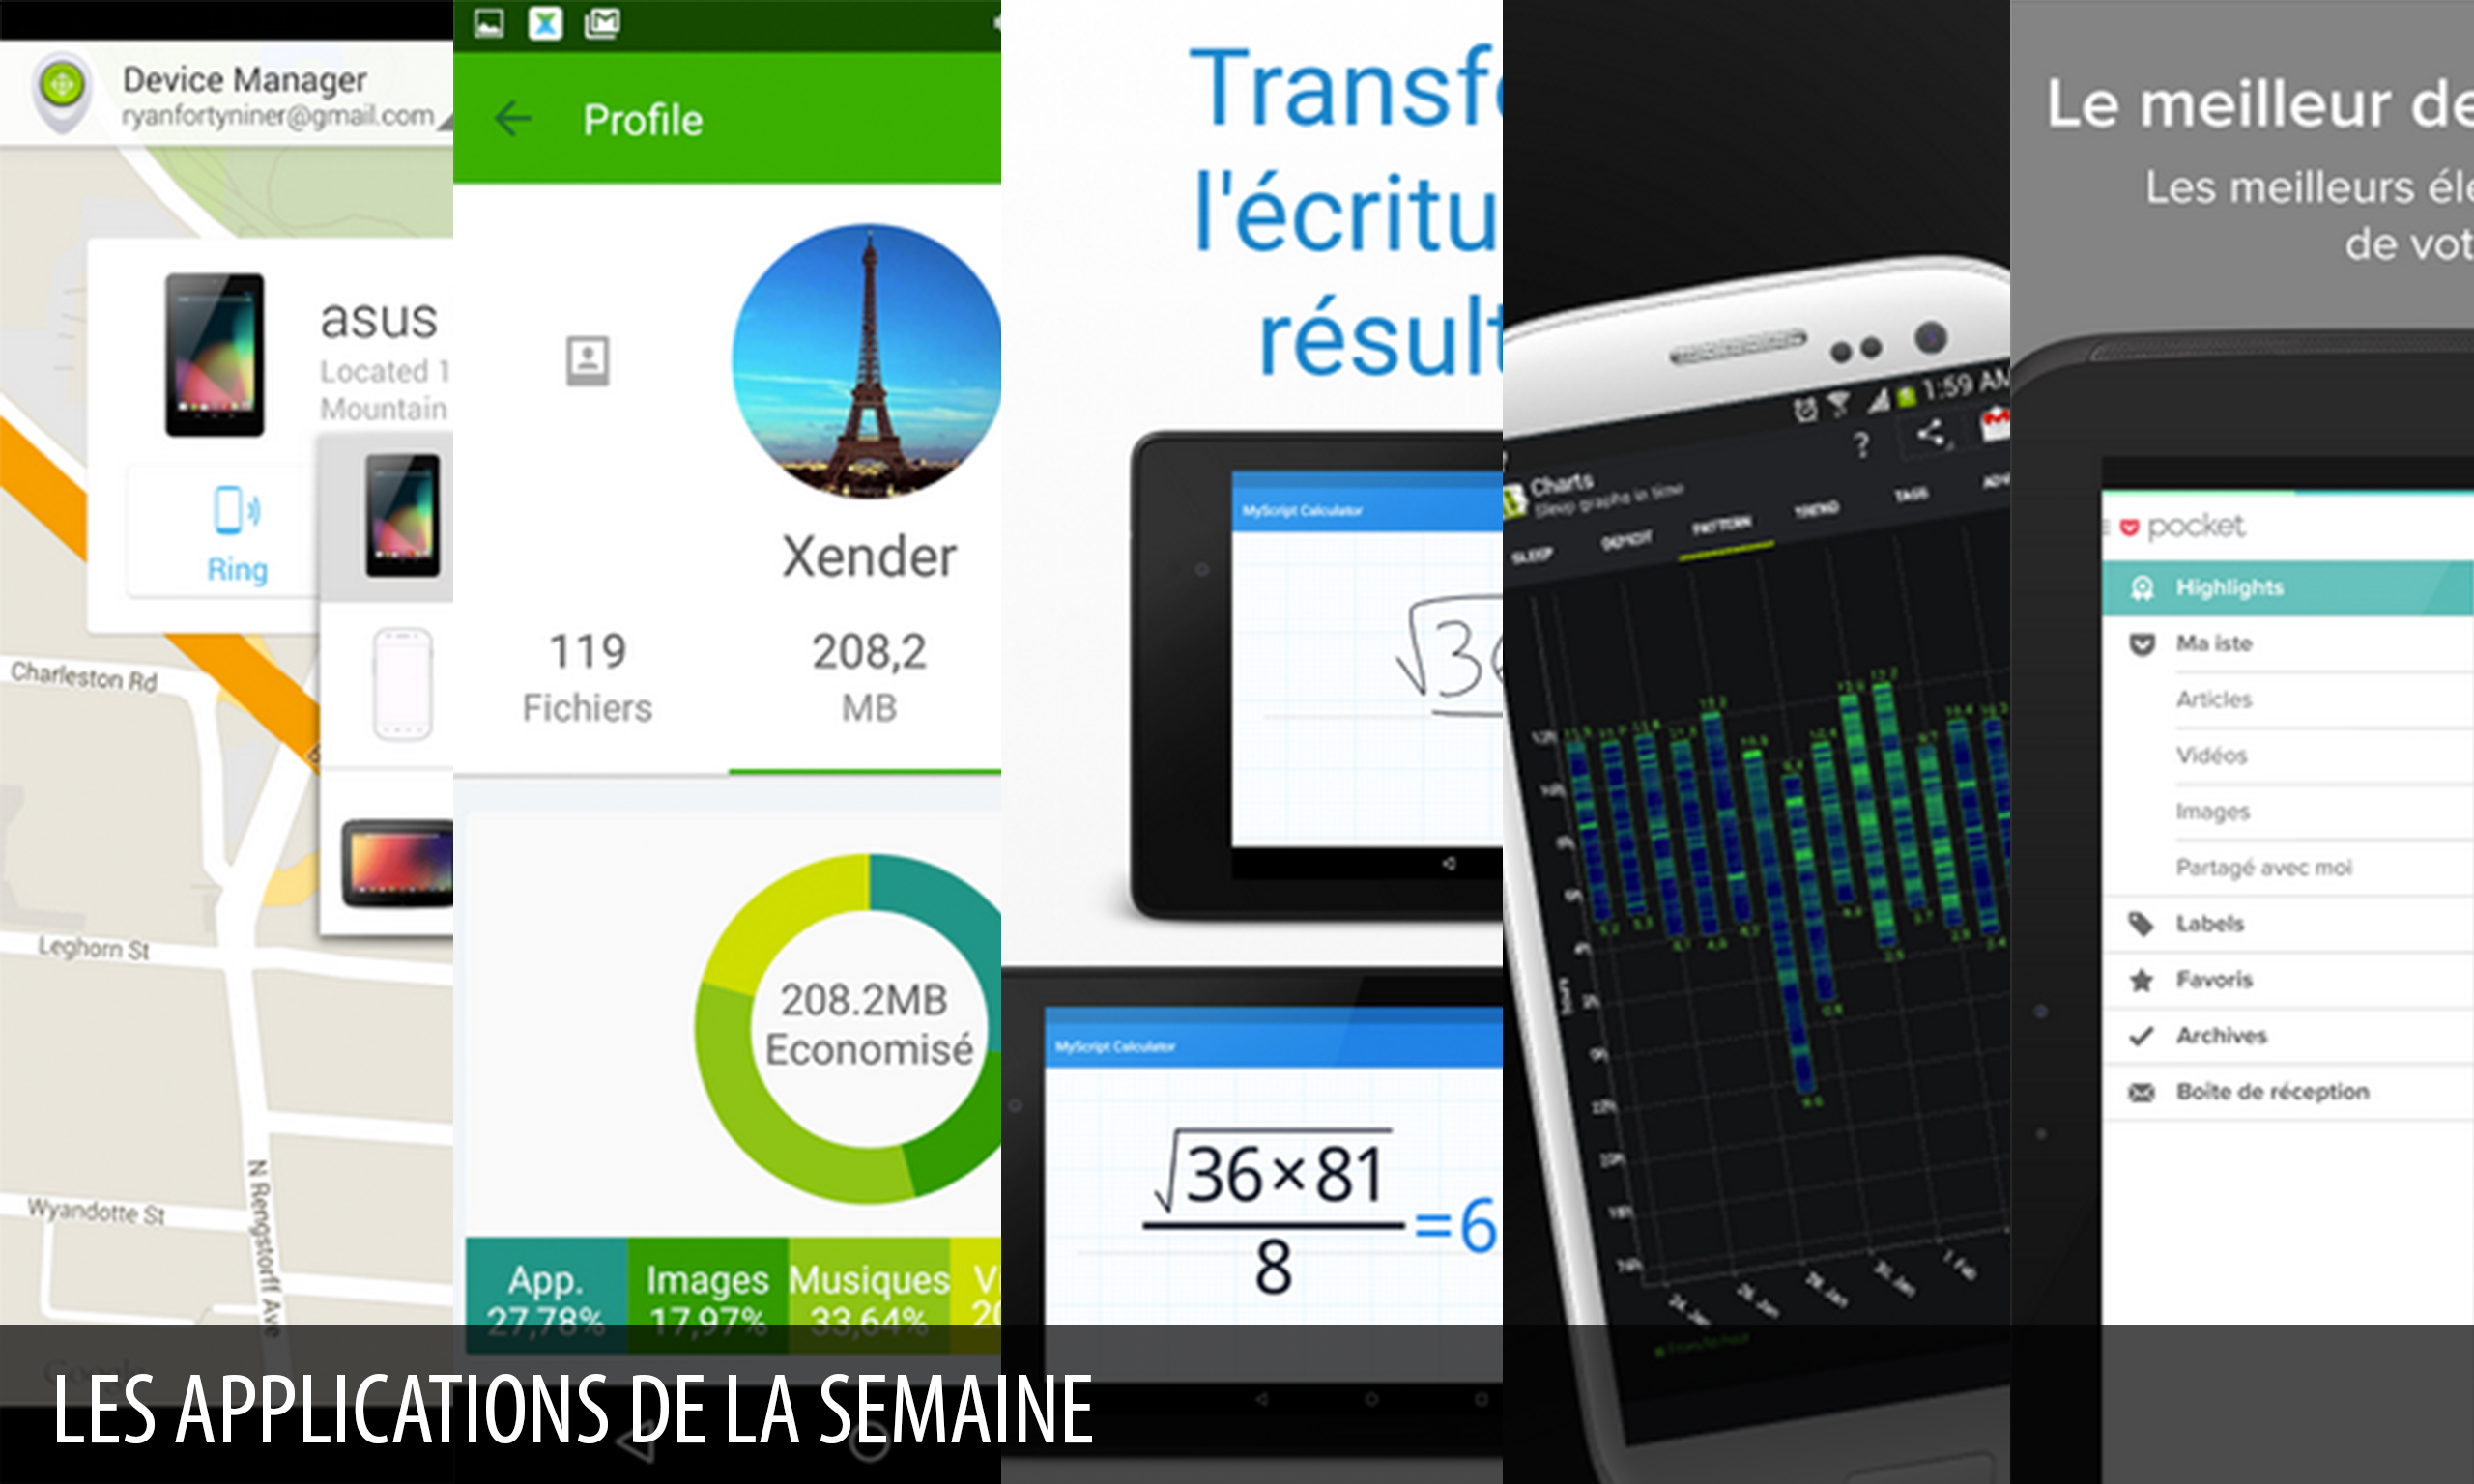 Les apps de la semaine : Android Device Manager, Xender, File Transfer & Share, MyScript Calculator, Sleep as Android, Pocket